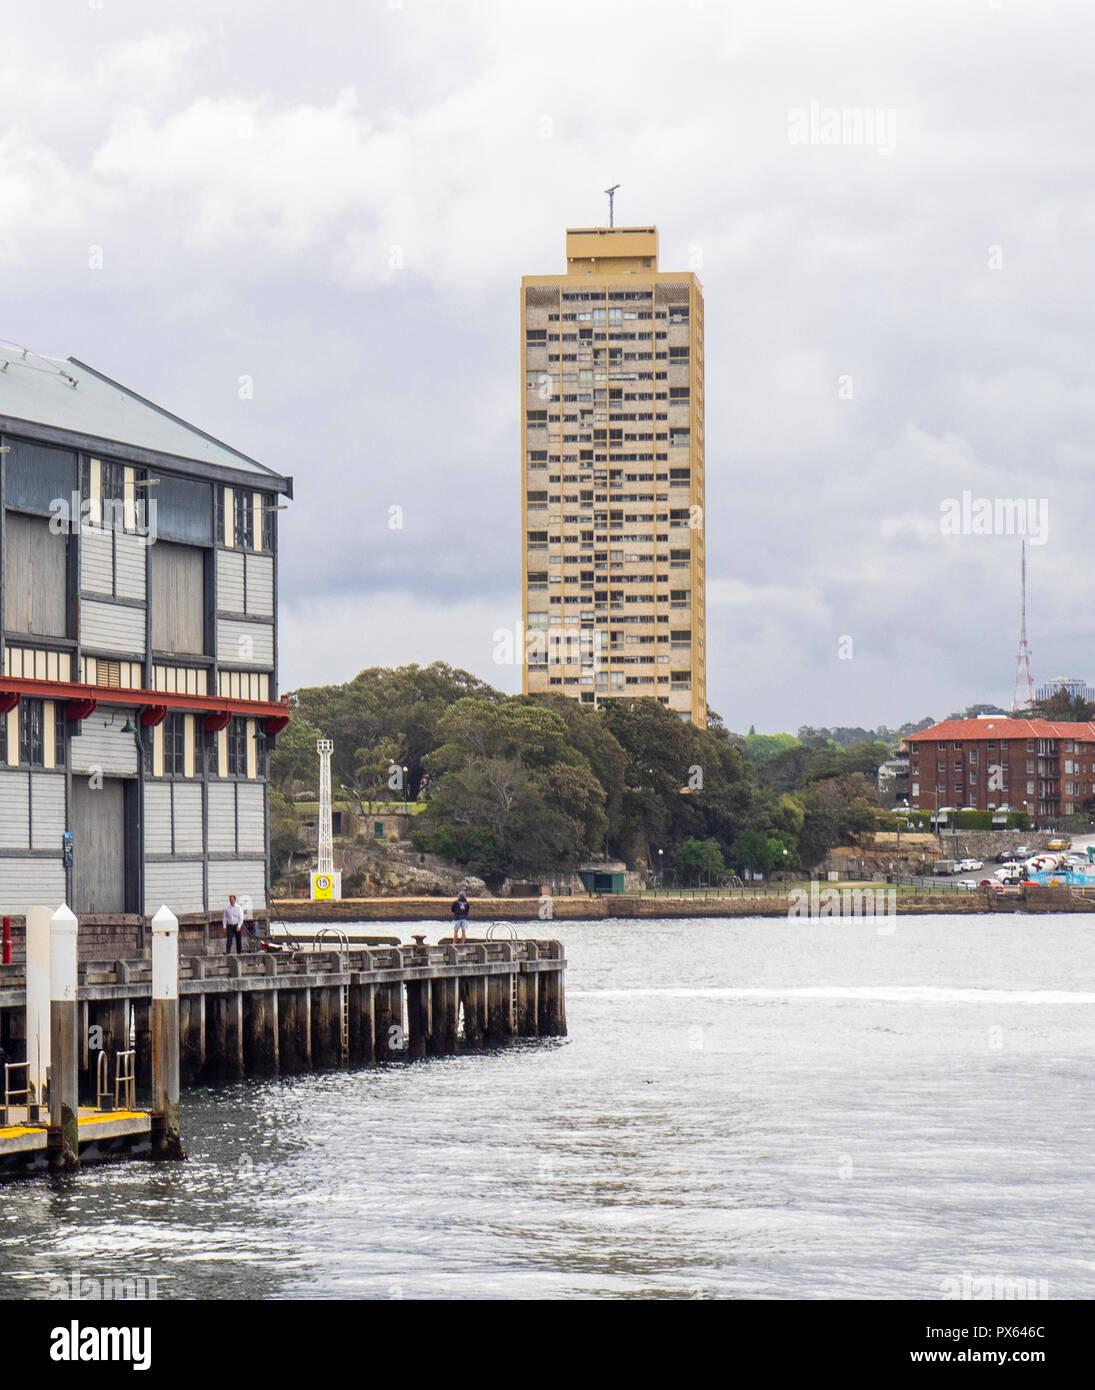 Blues point Tower residential tower and end of Pier 2/3 Walsh Bay Wharves precinct Sydney NSW Australia. Stock Photo